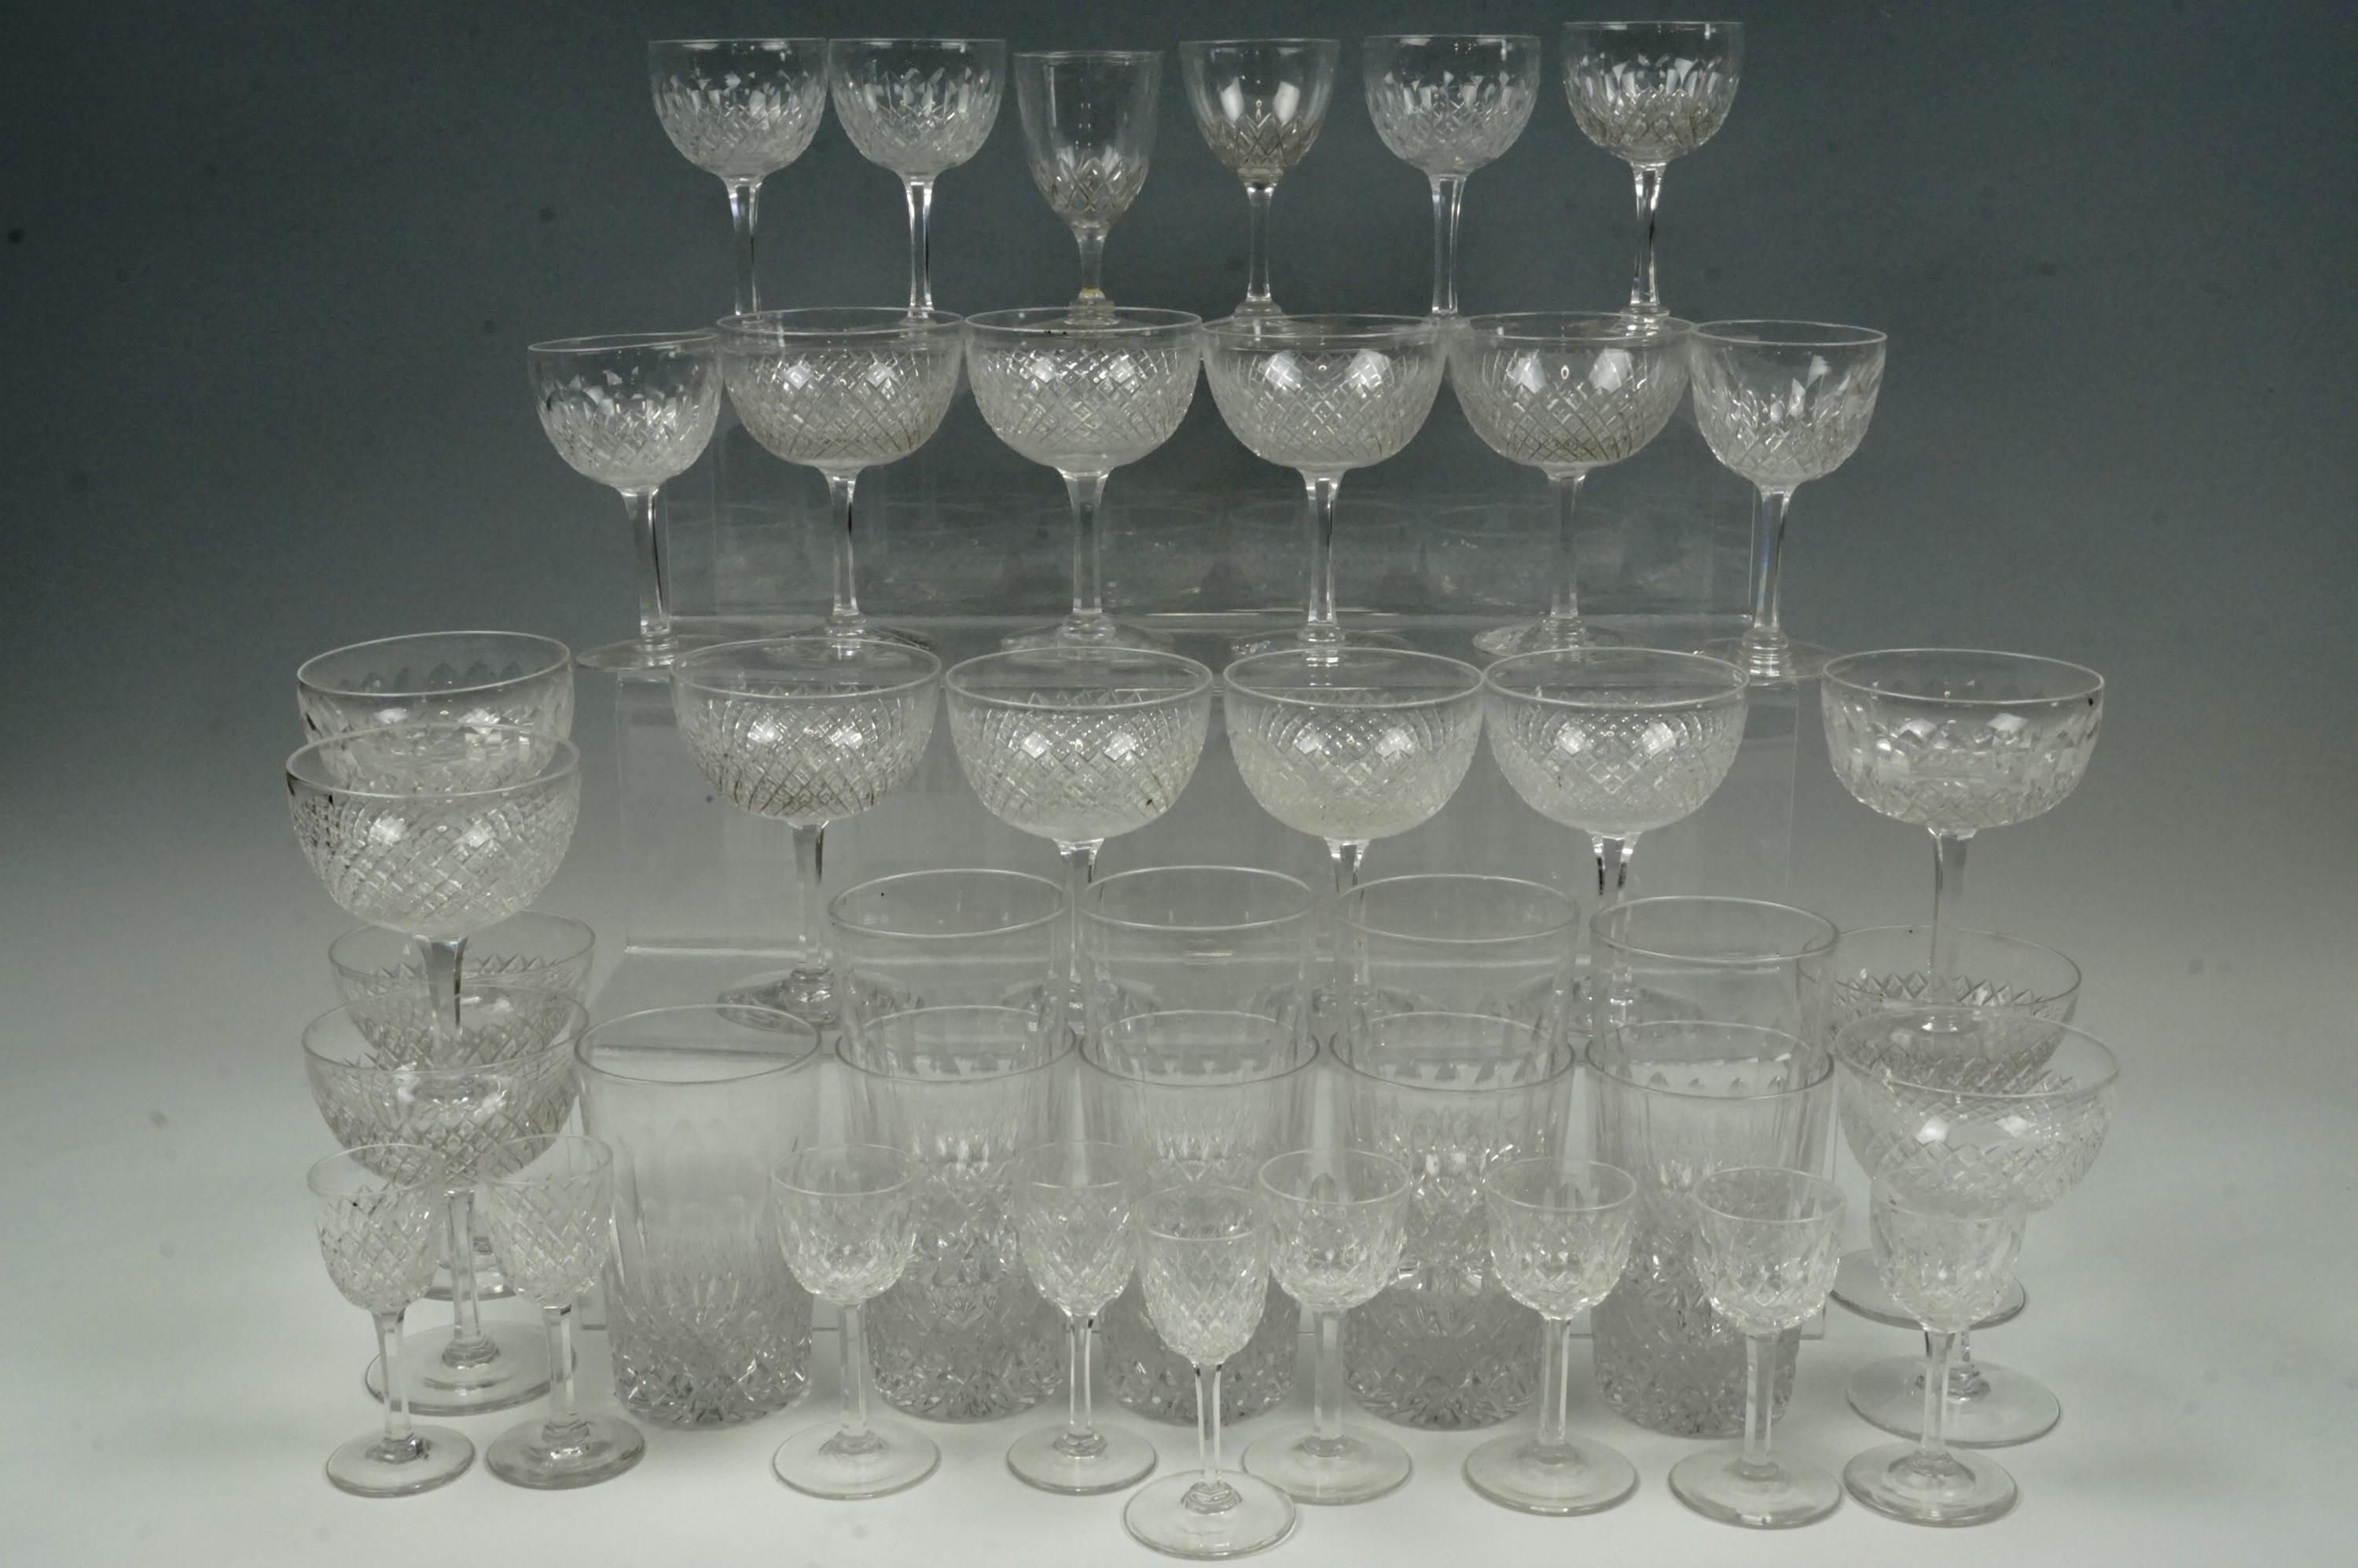 A large quantity of late 19th / early 20th Century drinking glasses, facet-cut in a cross-cut-